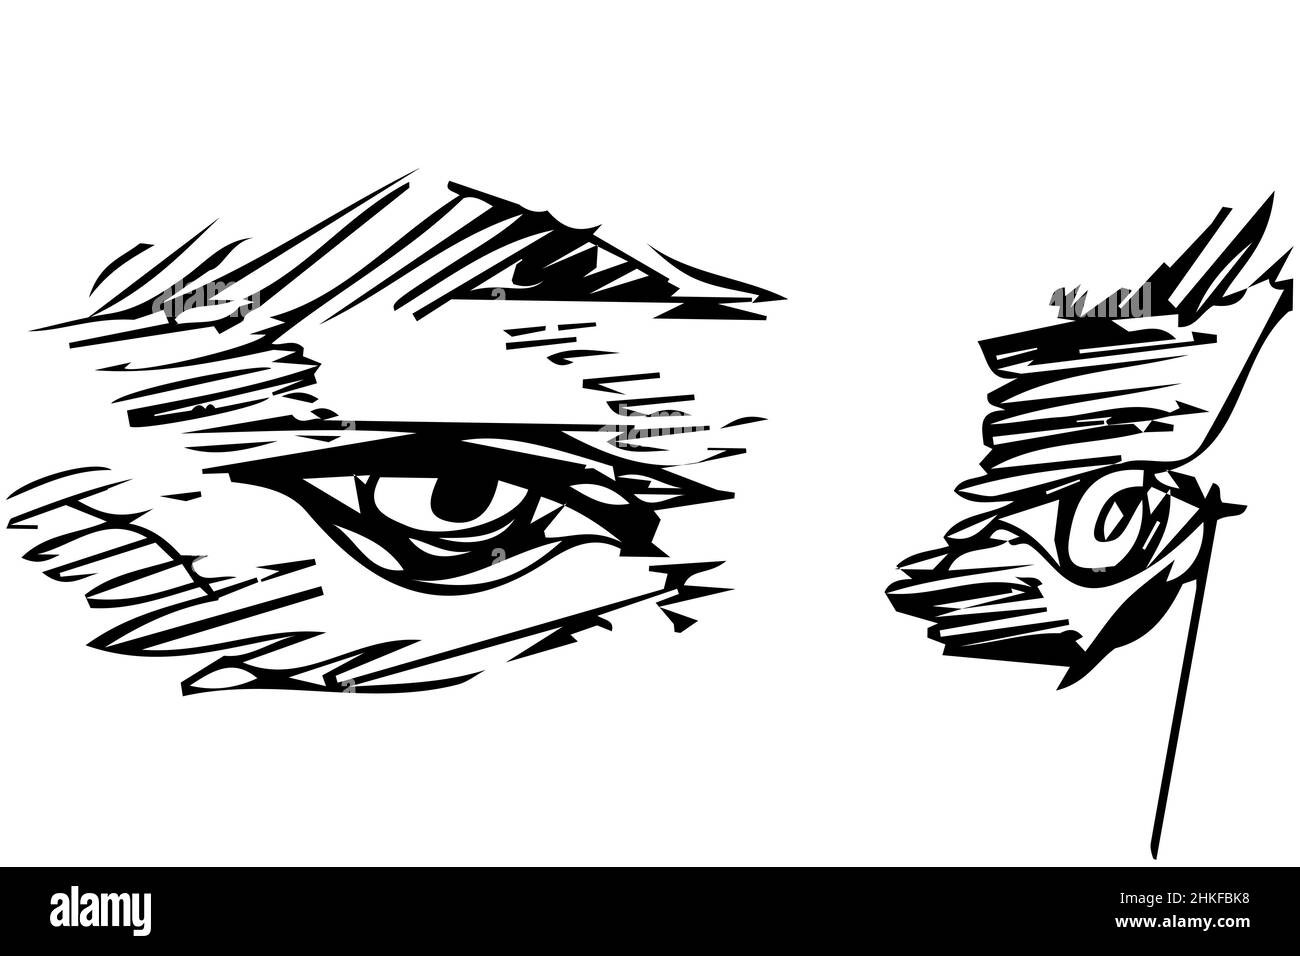 Black and white vector sketch of a careful man's eye Stock Photo